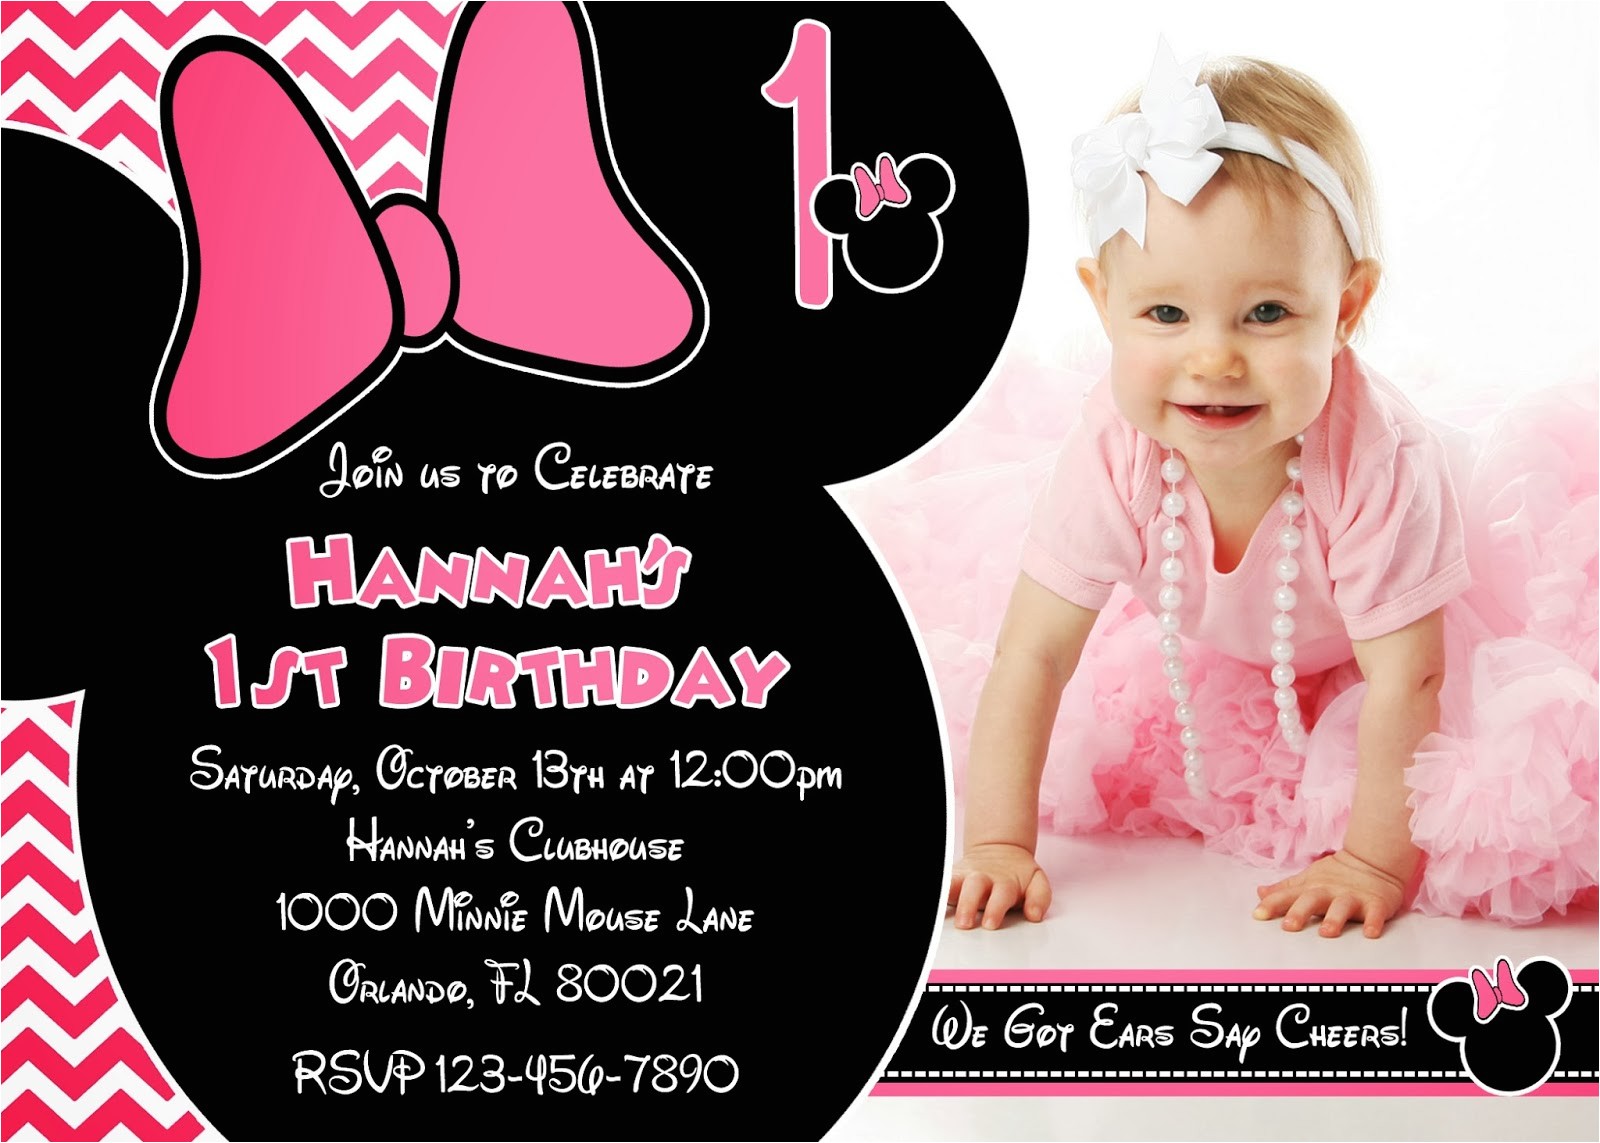 Invitation for One Year Old Birthday Party E Year Old Birthday Party Invitations